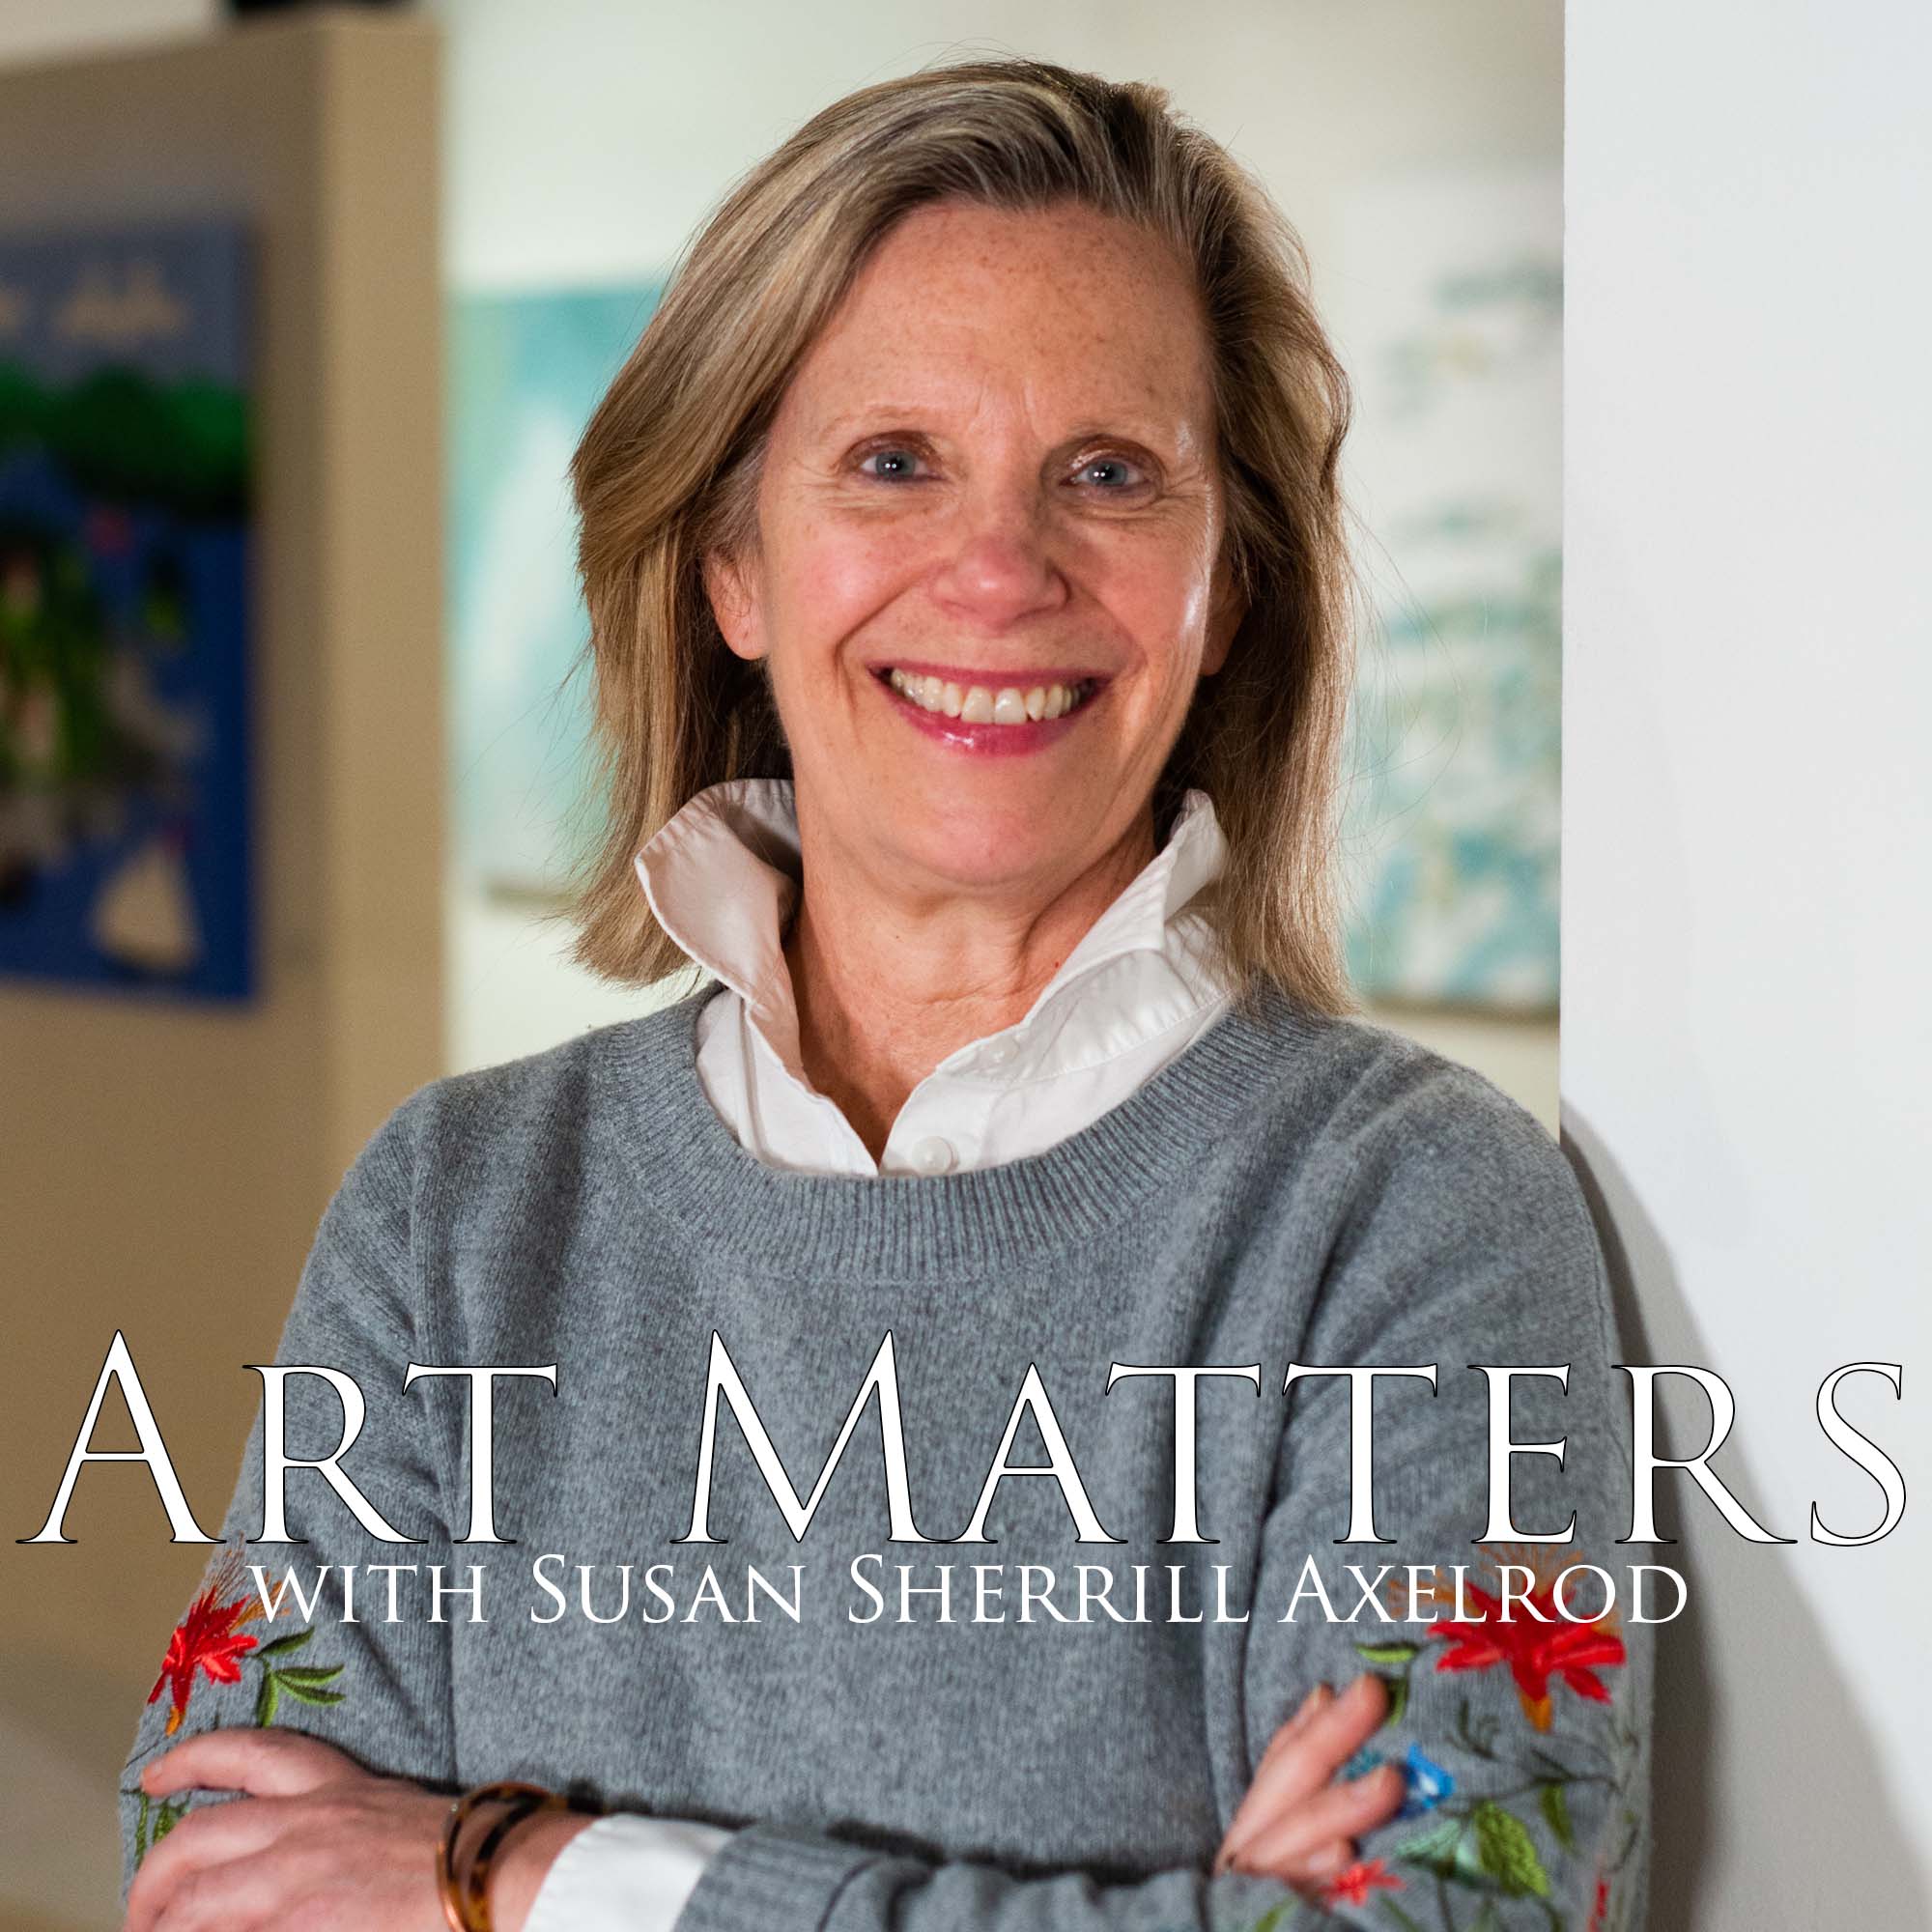 Susan Sherrill Axelrod, arts writer and editor of Art Matters